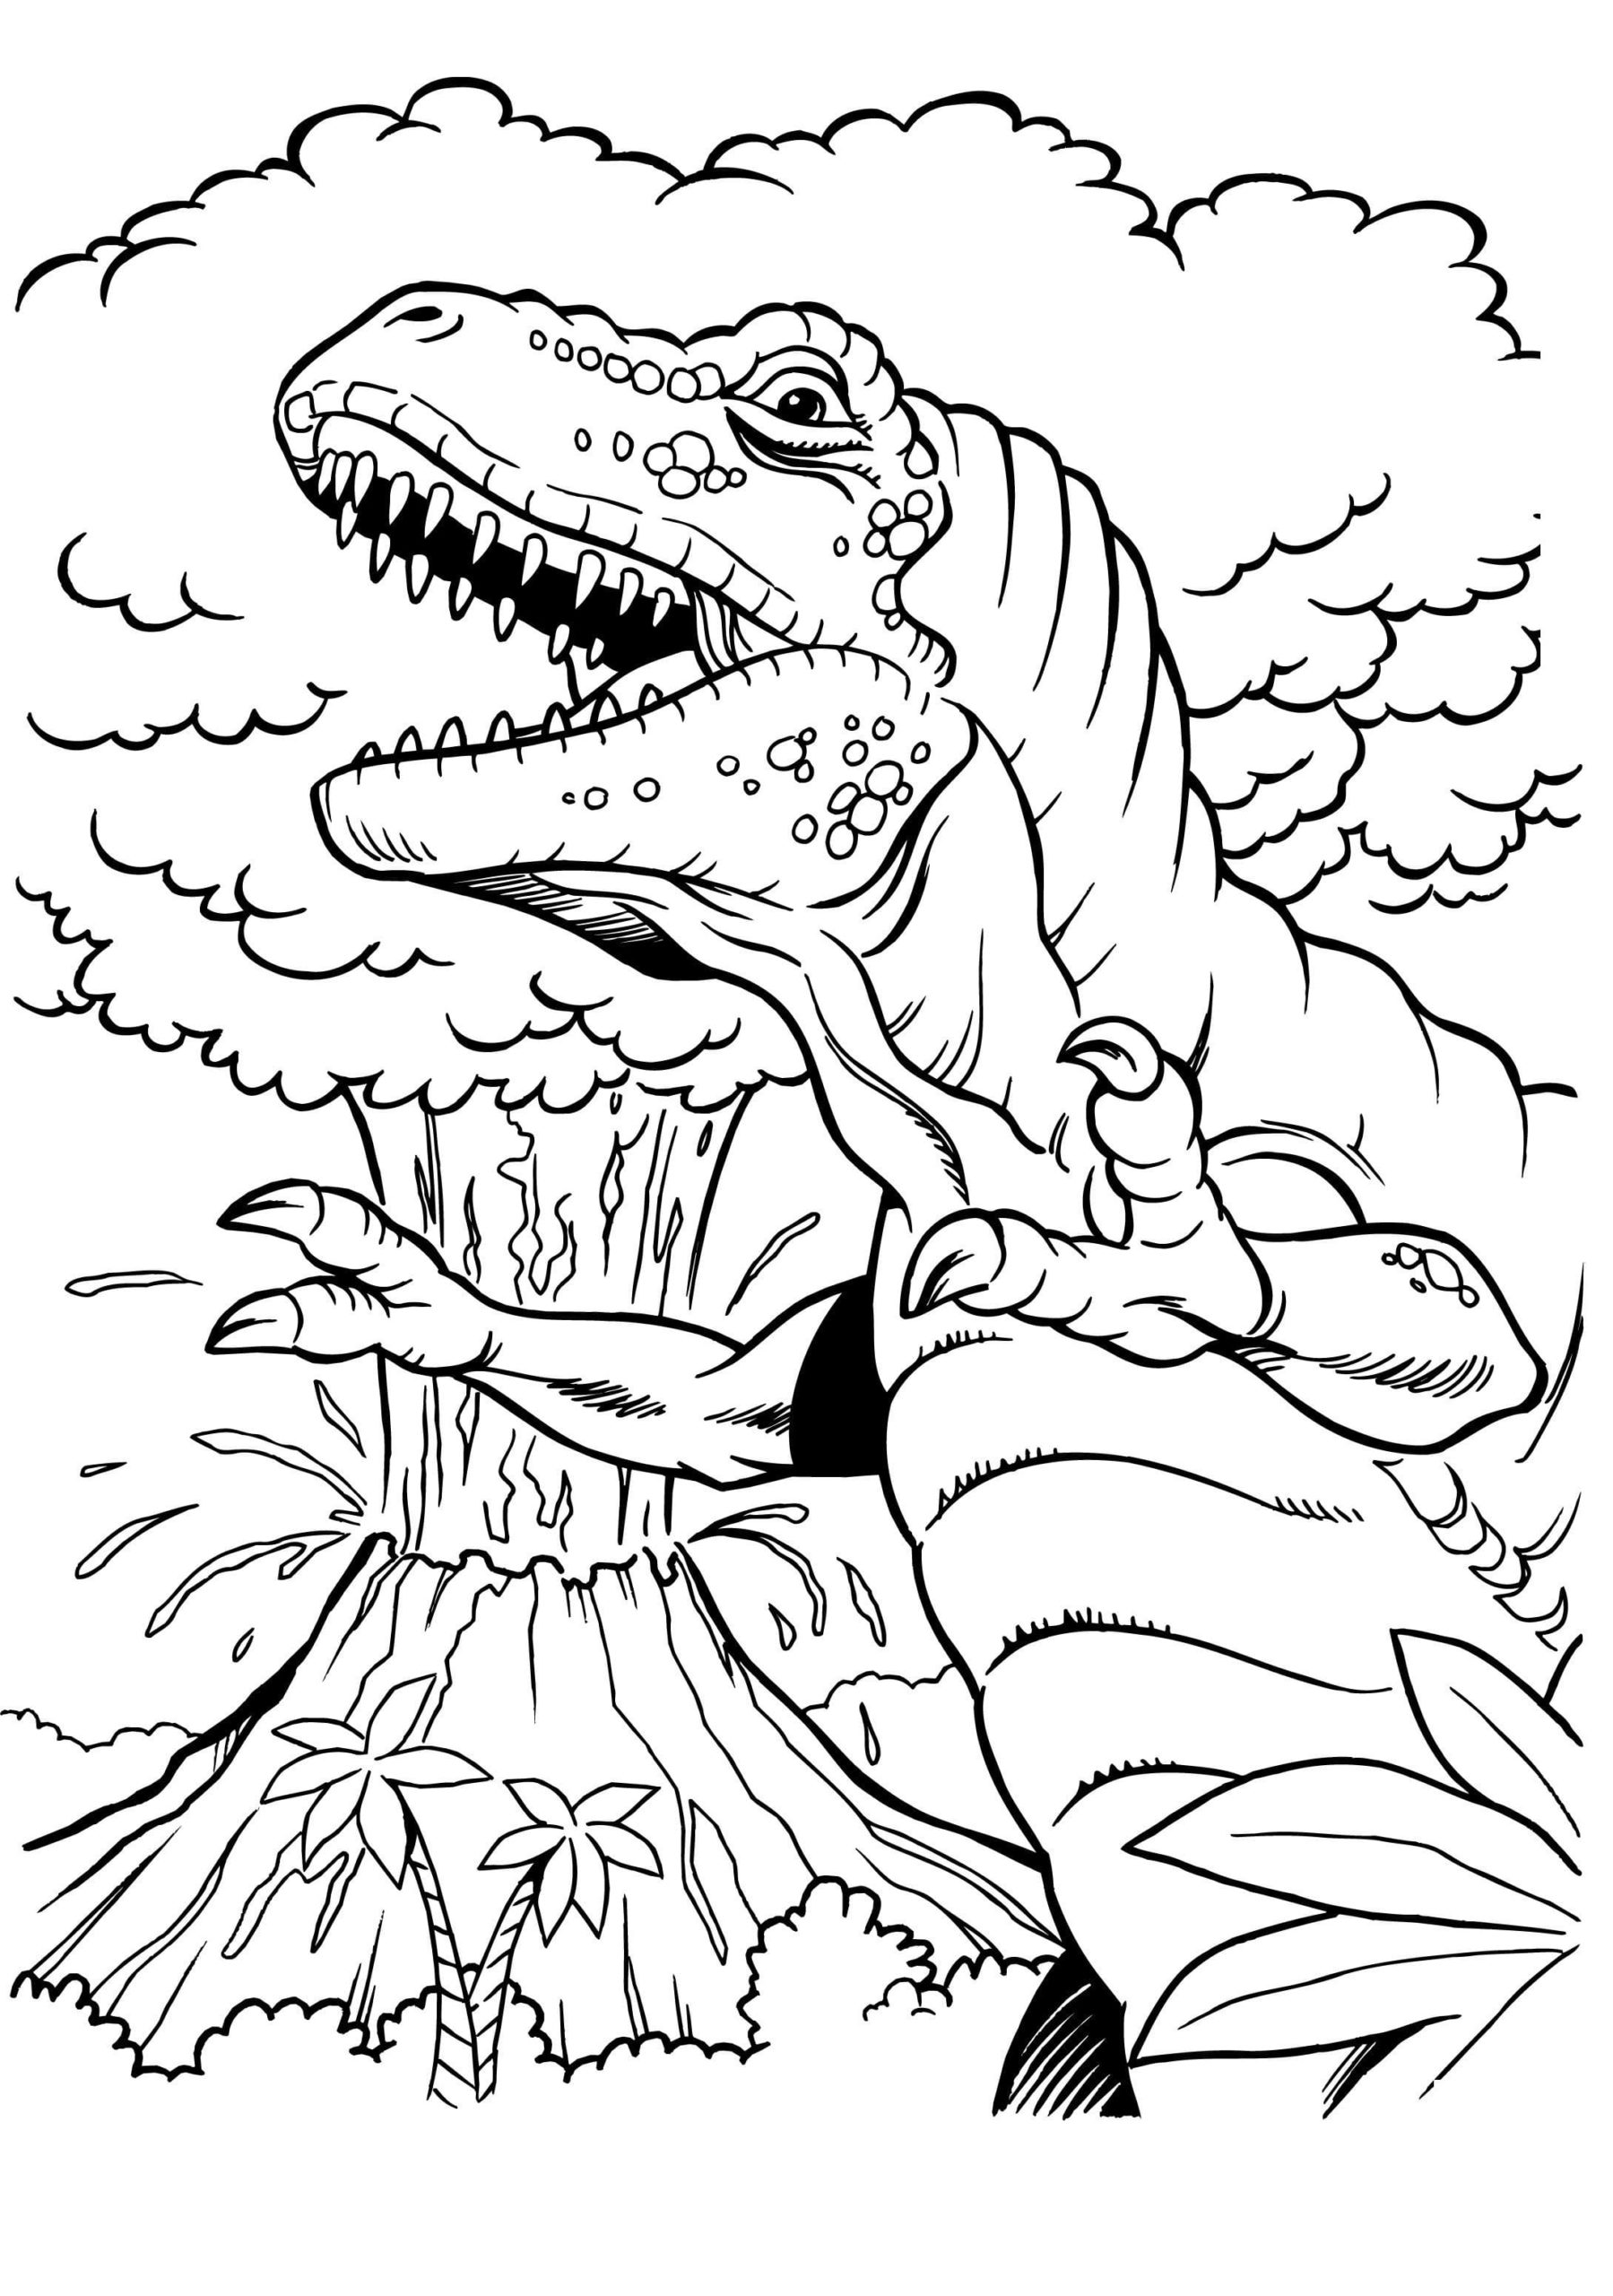 Coloring page T-rex Dinosaur and Volcano